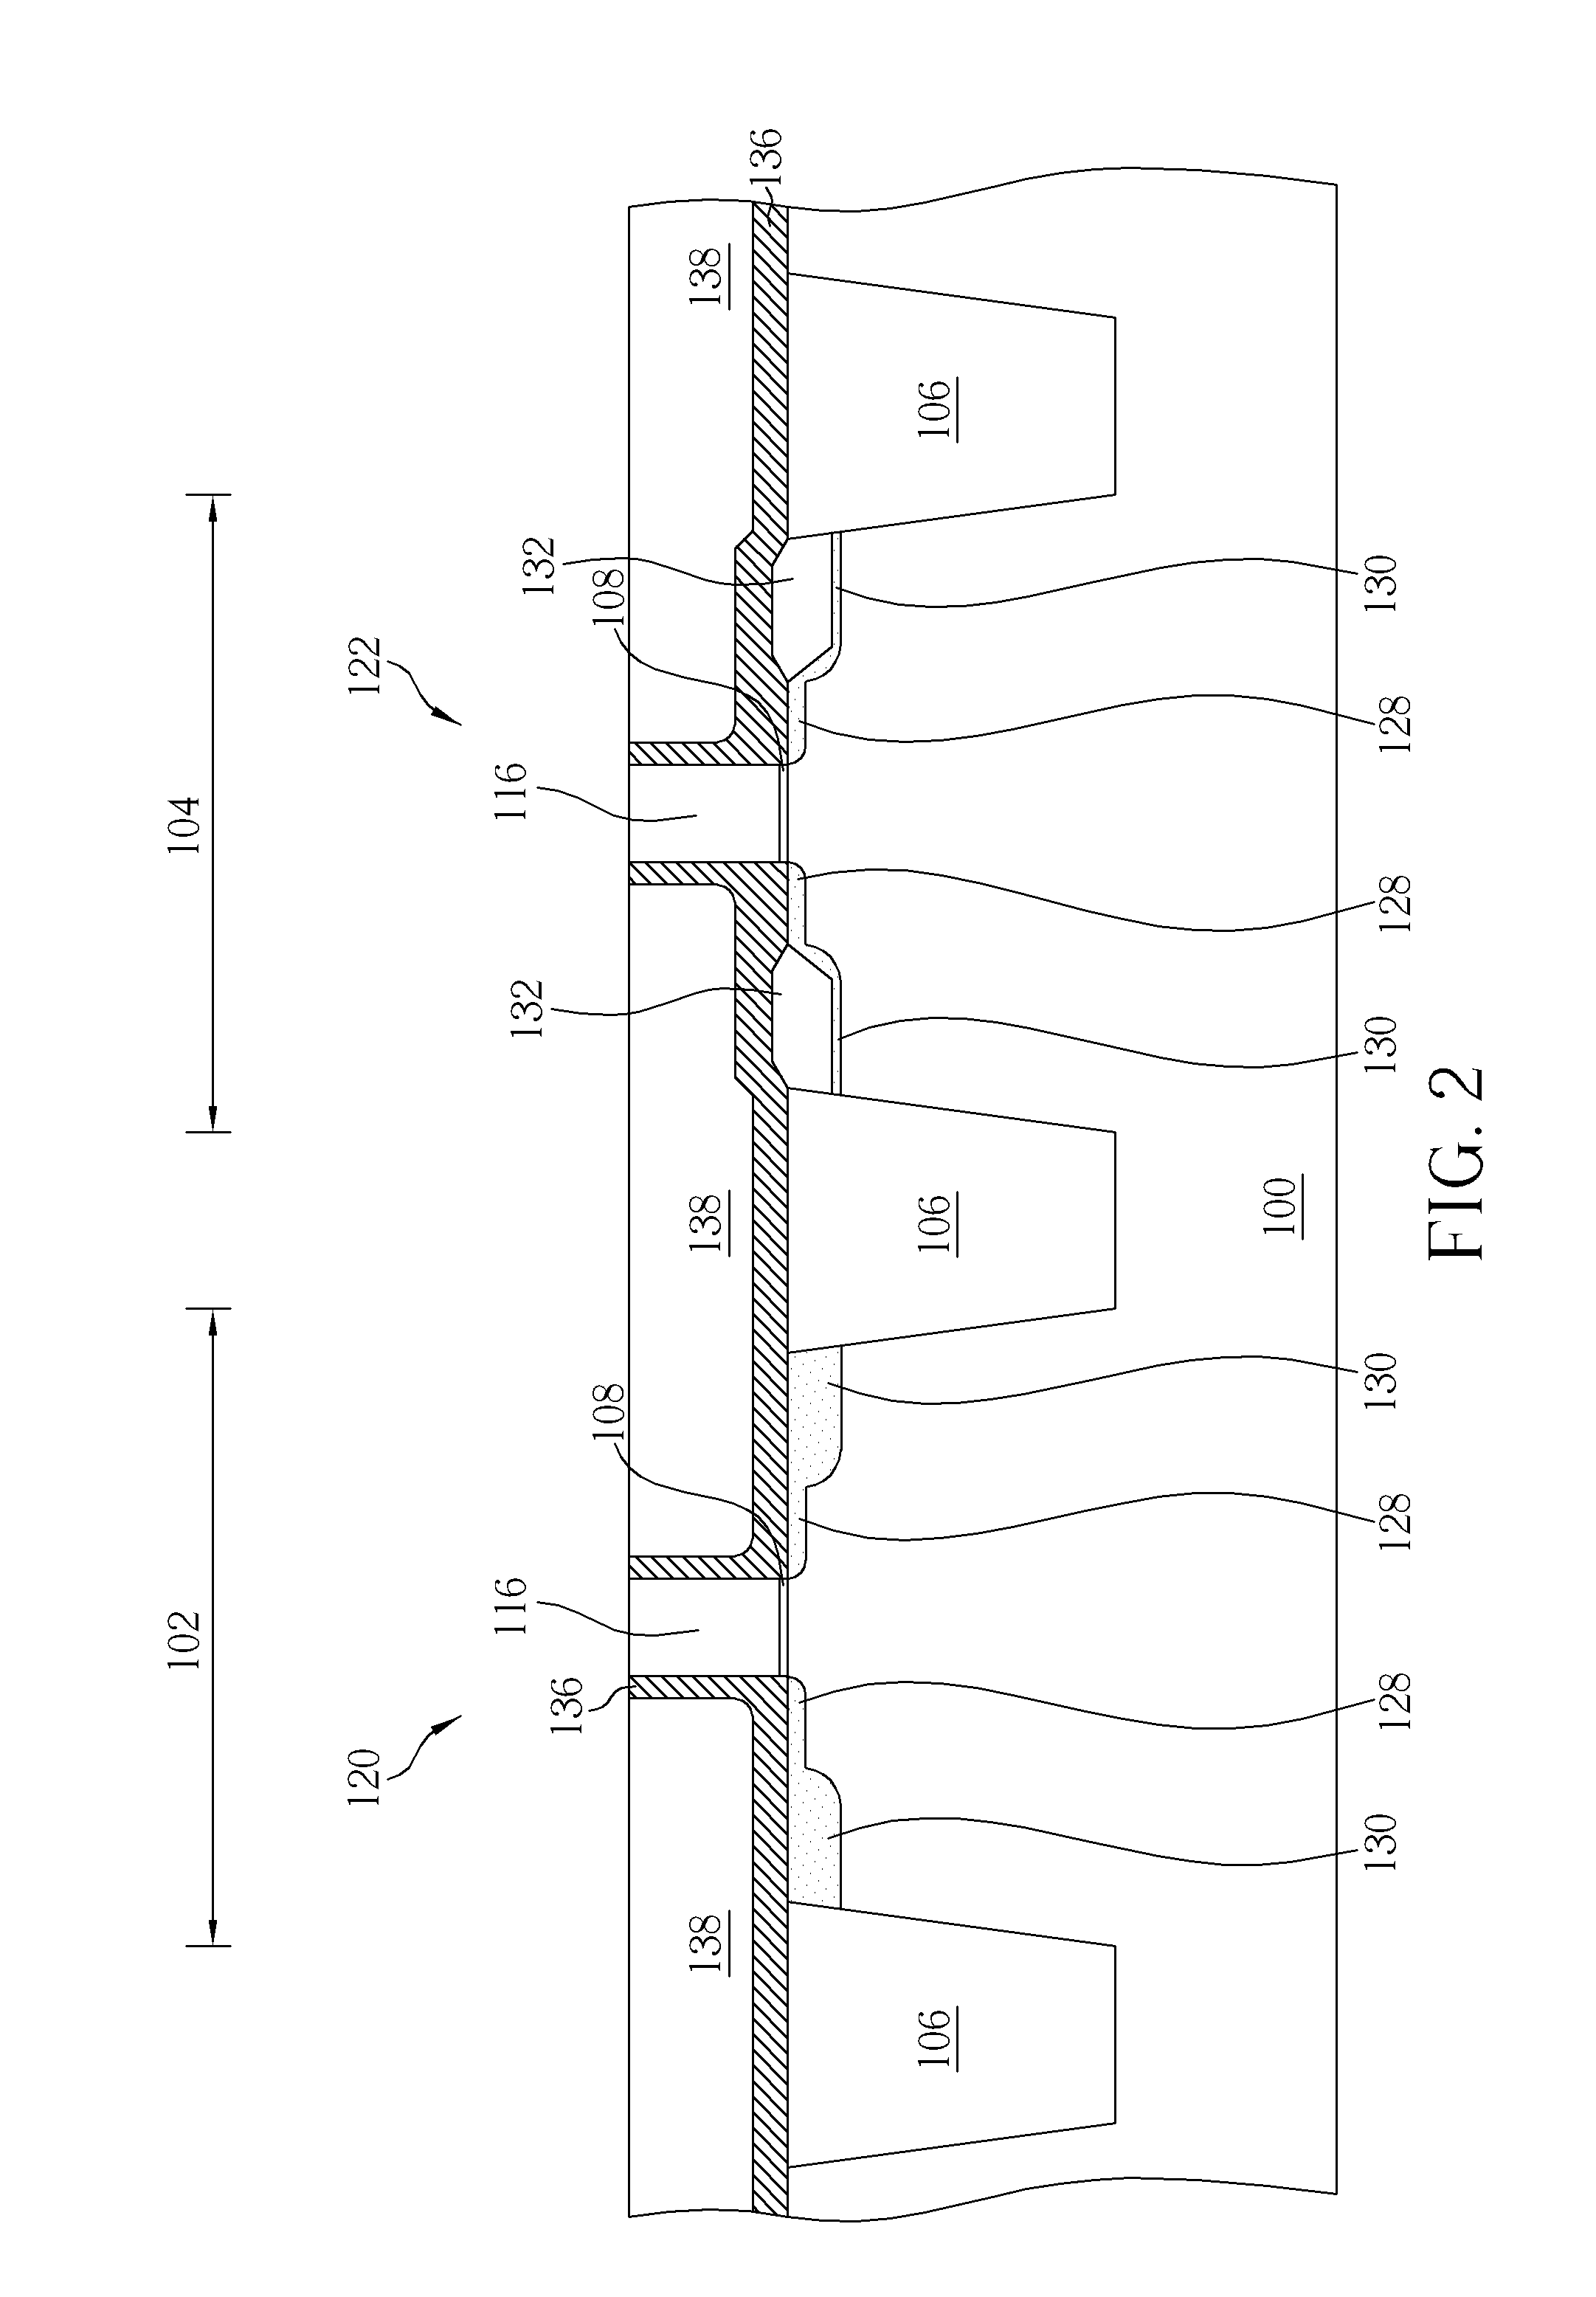 Structure of electrical contact and fabrication method thereof